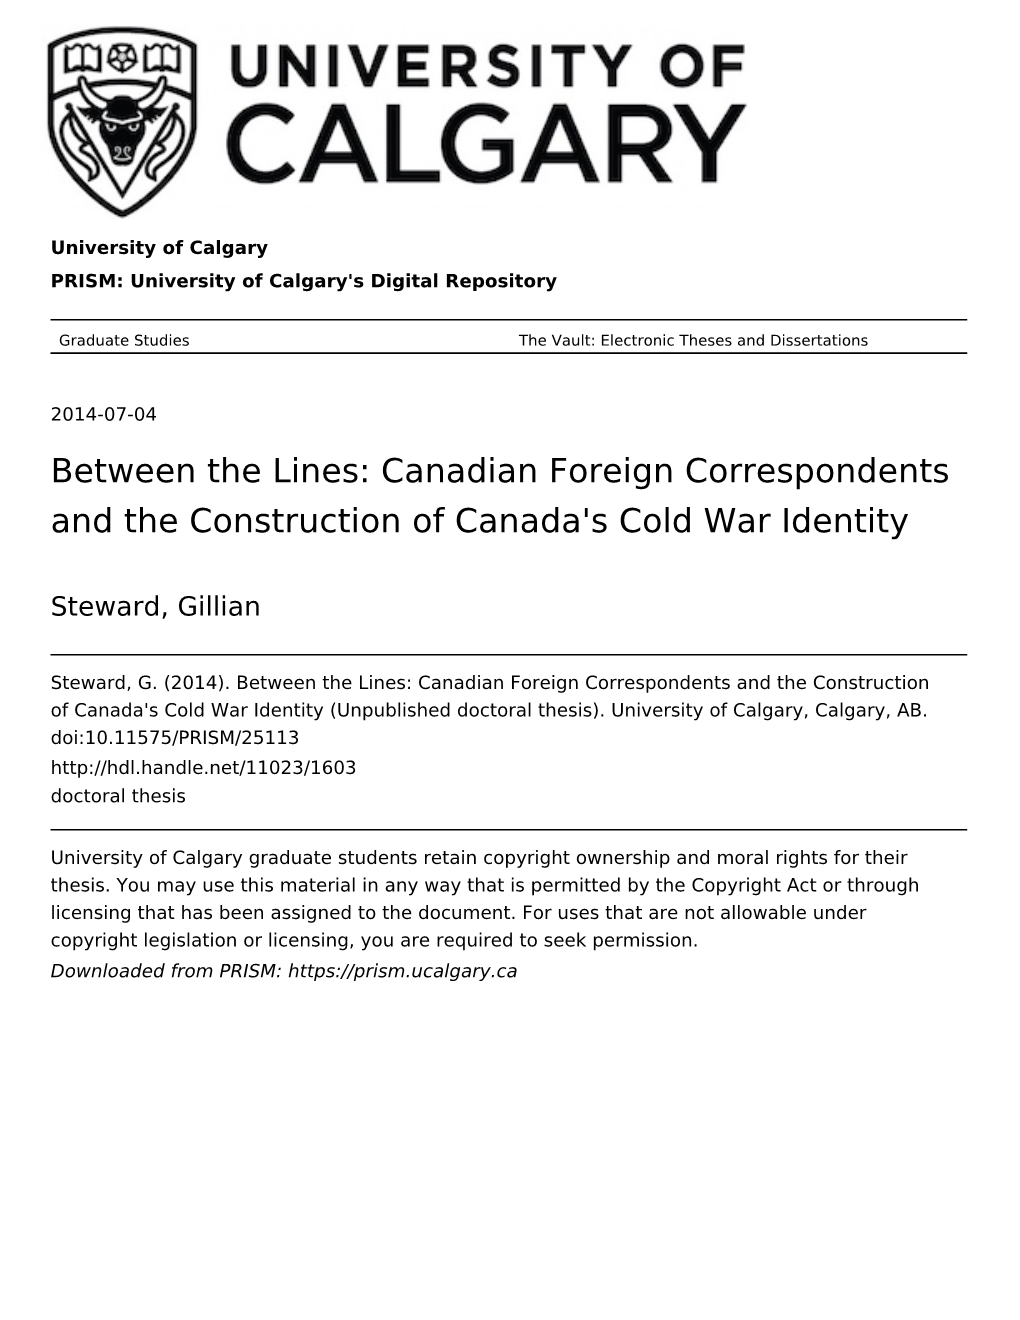 Between the Lines: Canadian Foreign Correspondents and the Construction of Canada's Cold War Identity